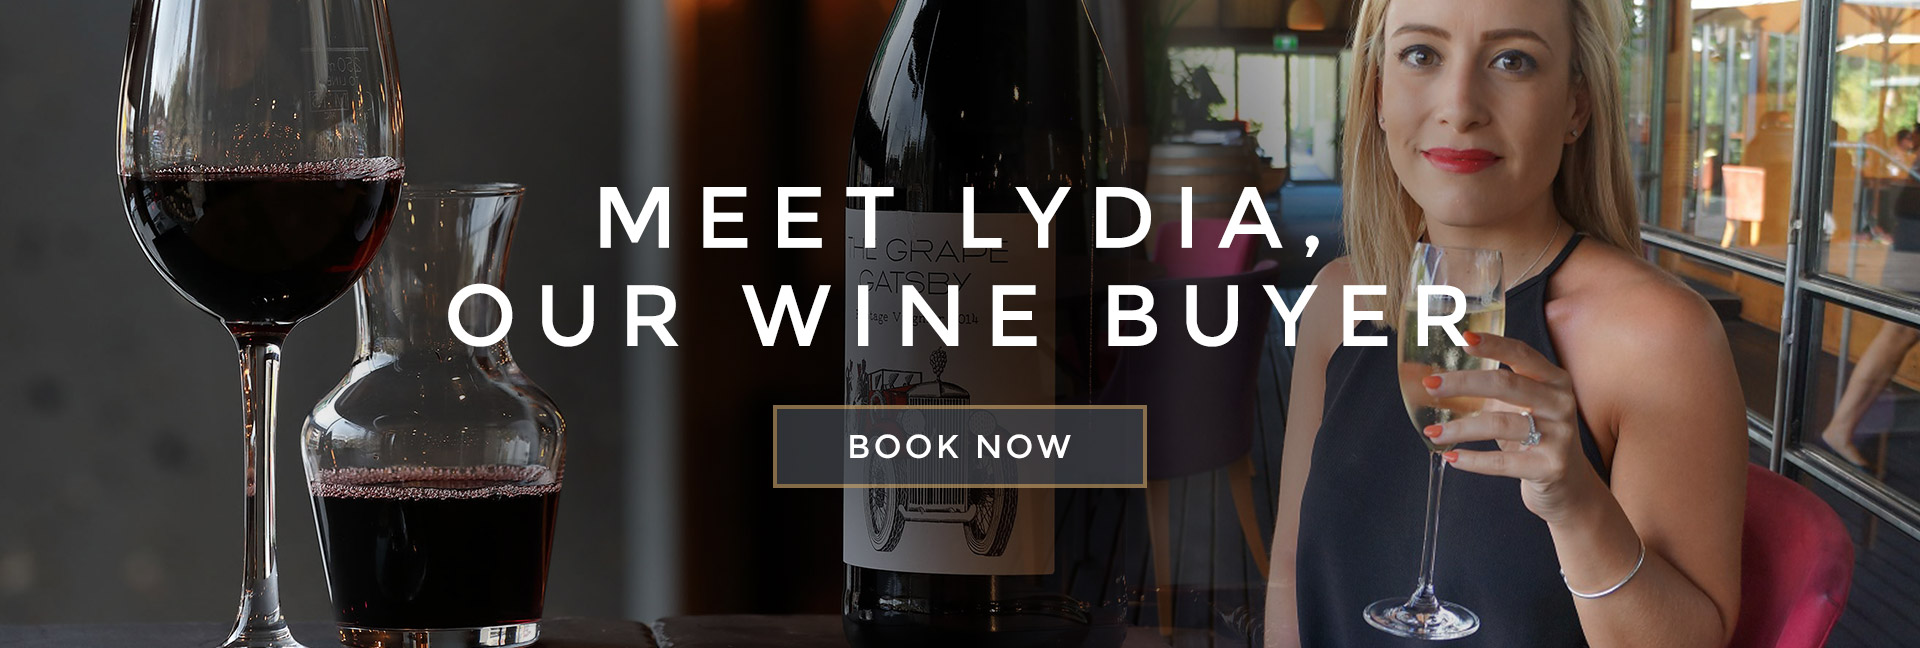 Meet Lydia, our wine buyer at All Bar One Milton Keynes